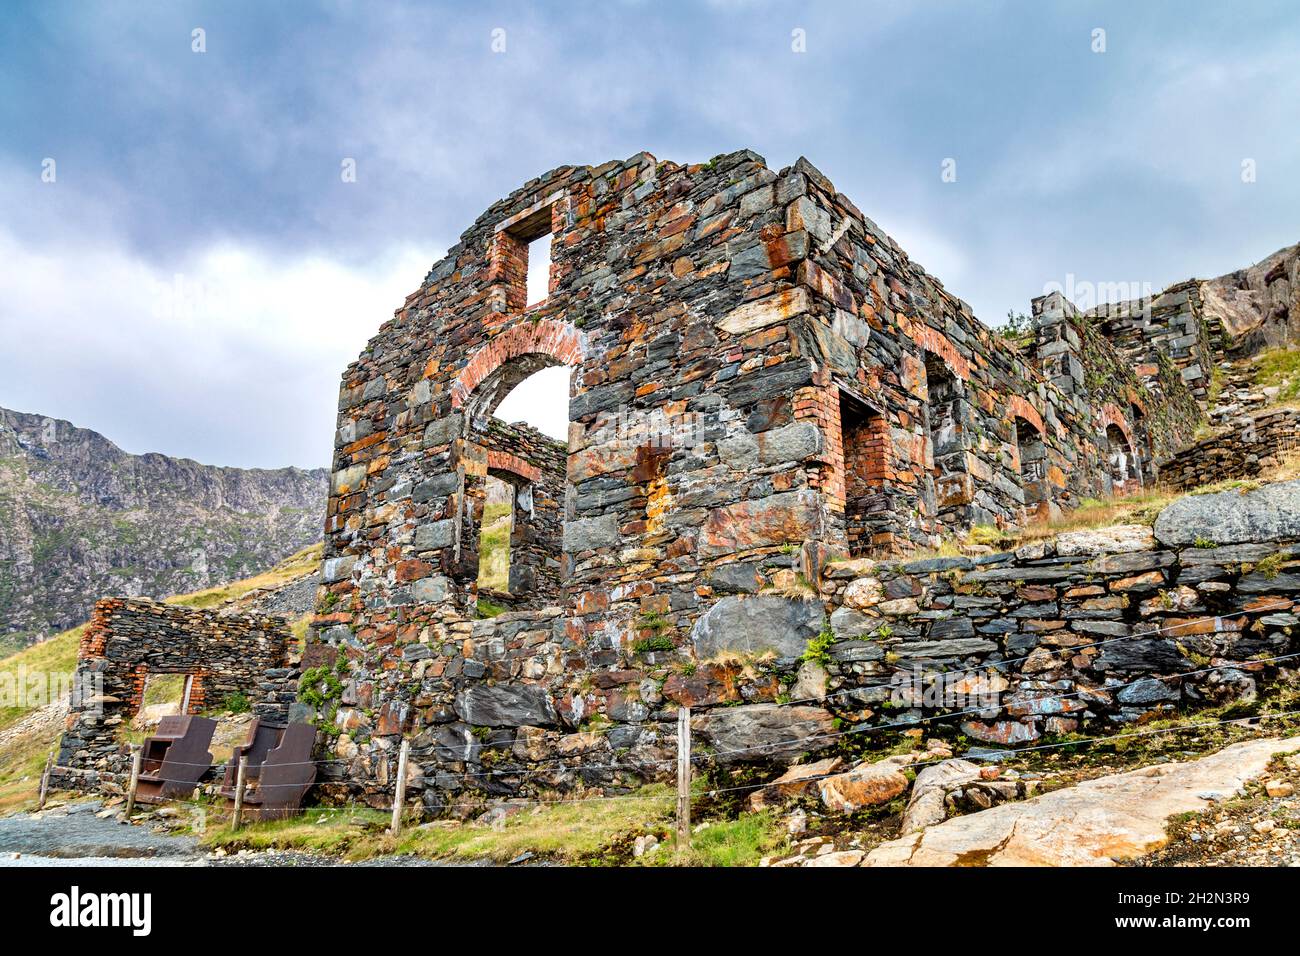 Ruins of the Brittania Copper Mine by Llyn Llydaw lake along the Miners' track up to Mount Snowdon, Snowdonia, Wales, UK Stock Photo